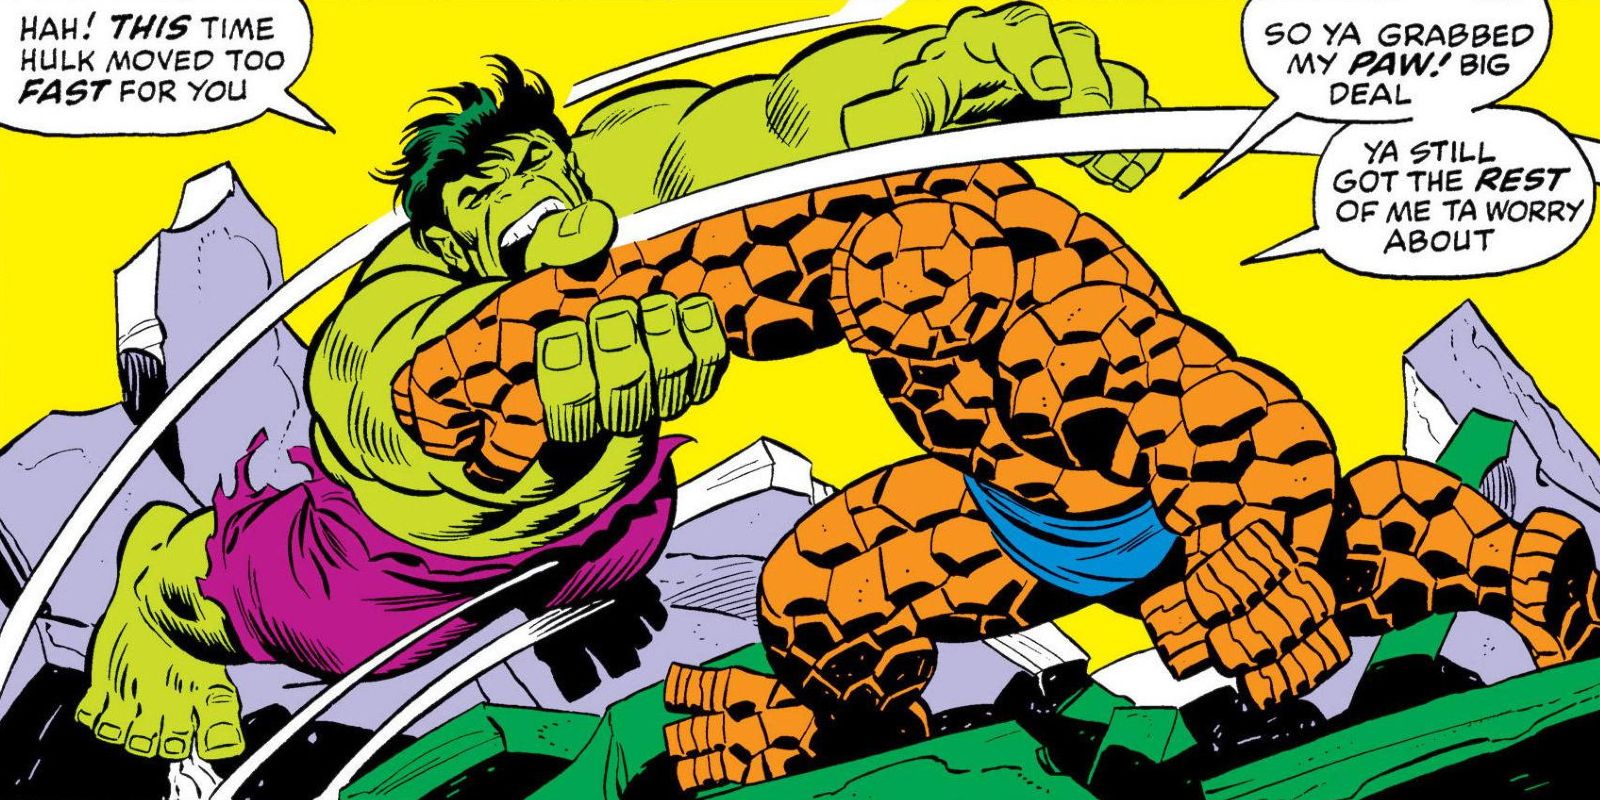 The Hulk and the Thing grapple each other in battle.